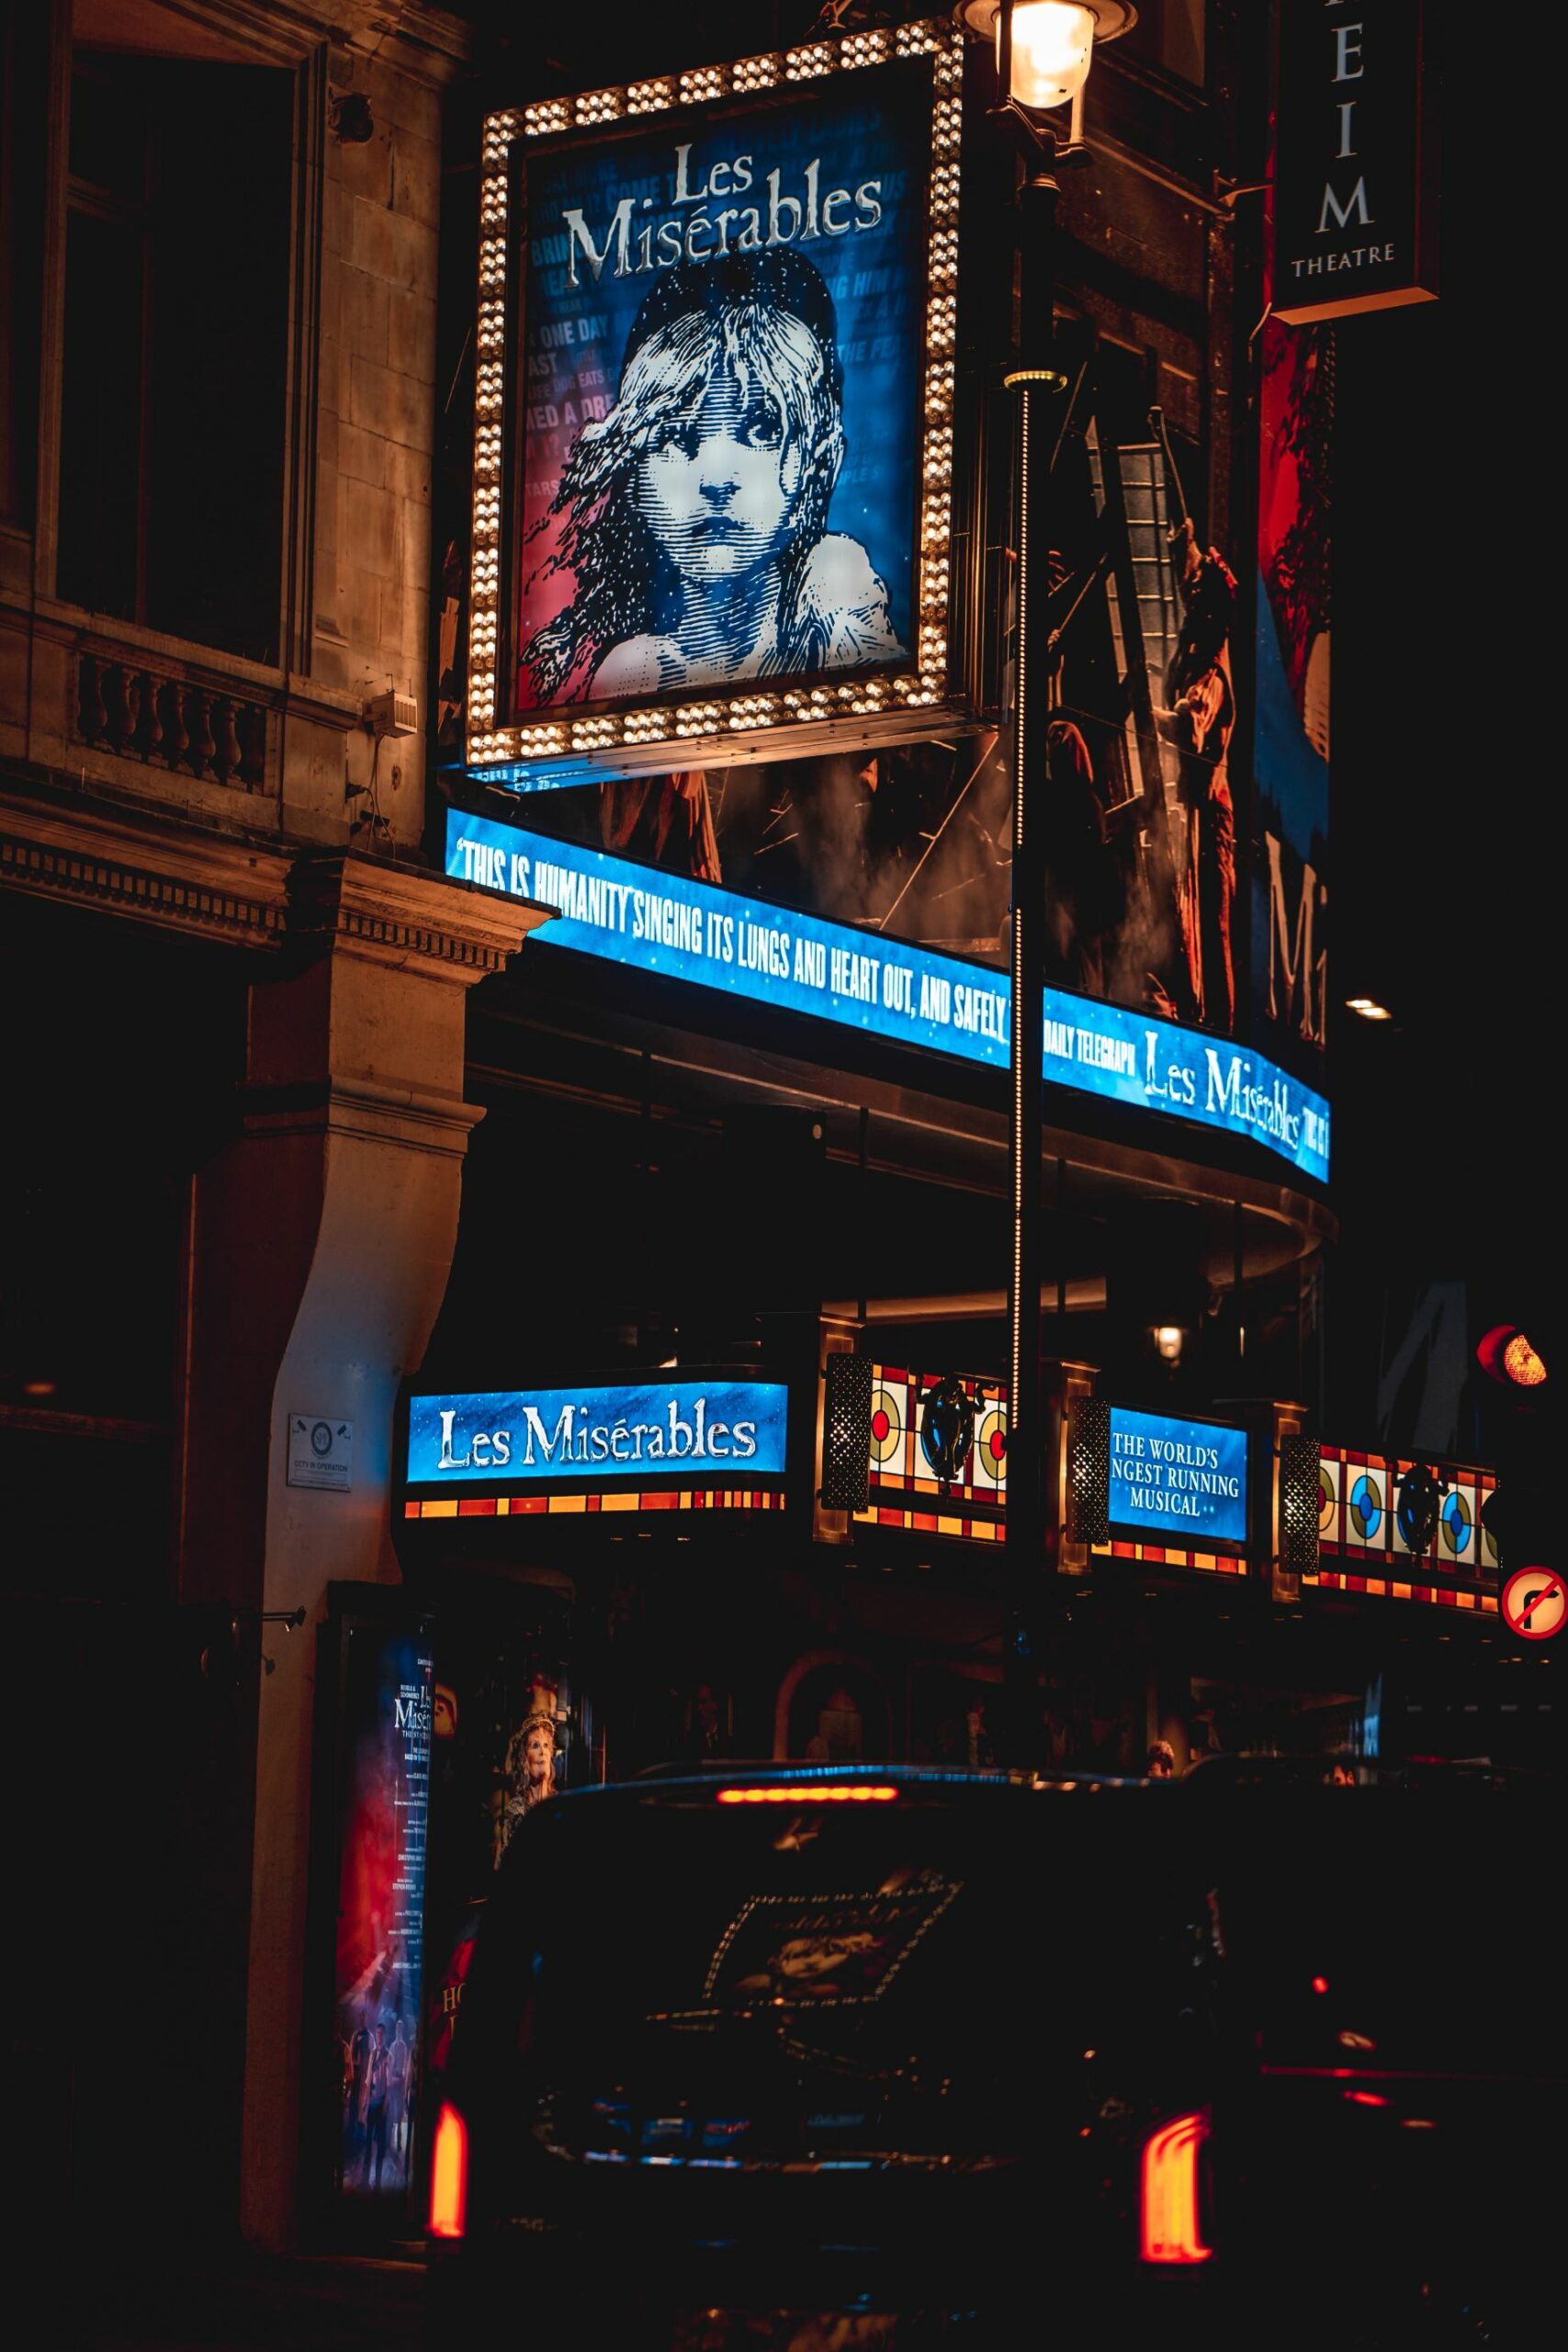 An image of the poster for Les Miserables.